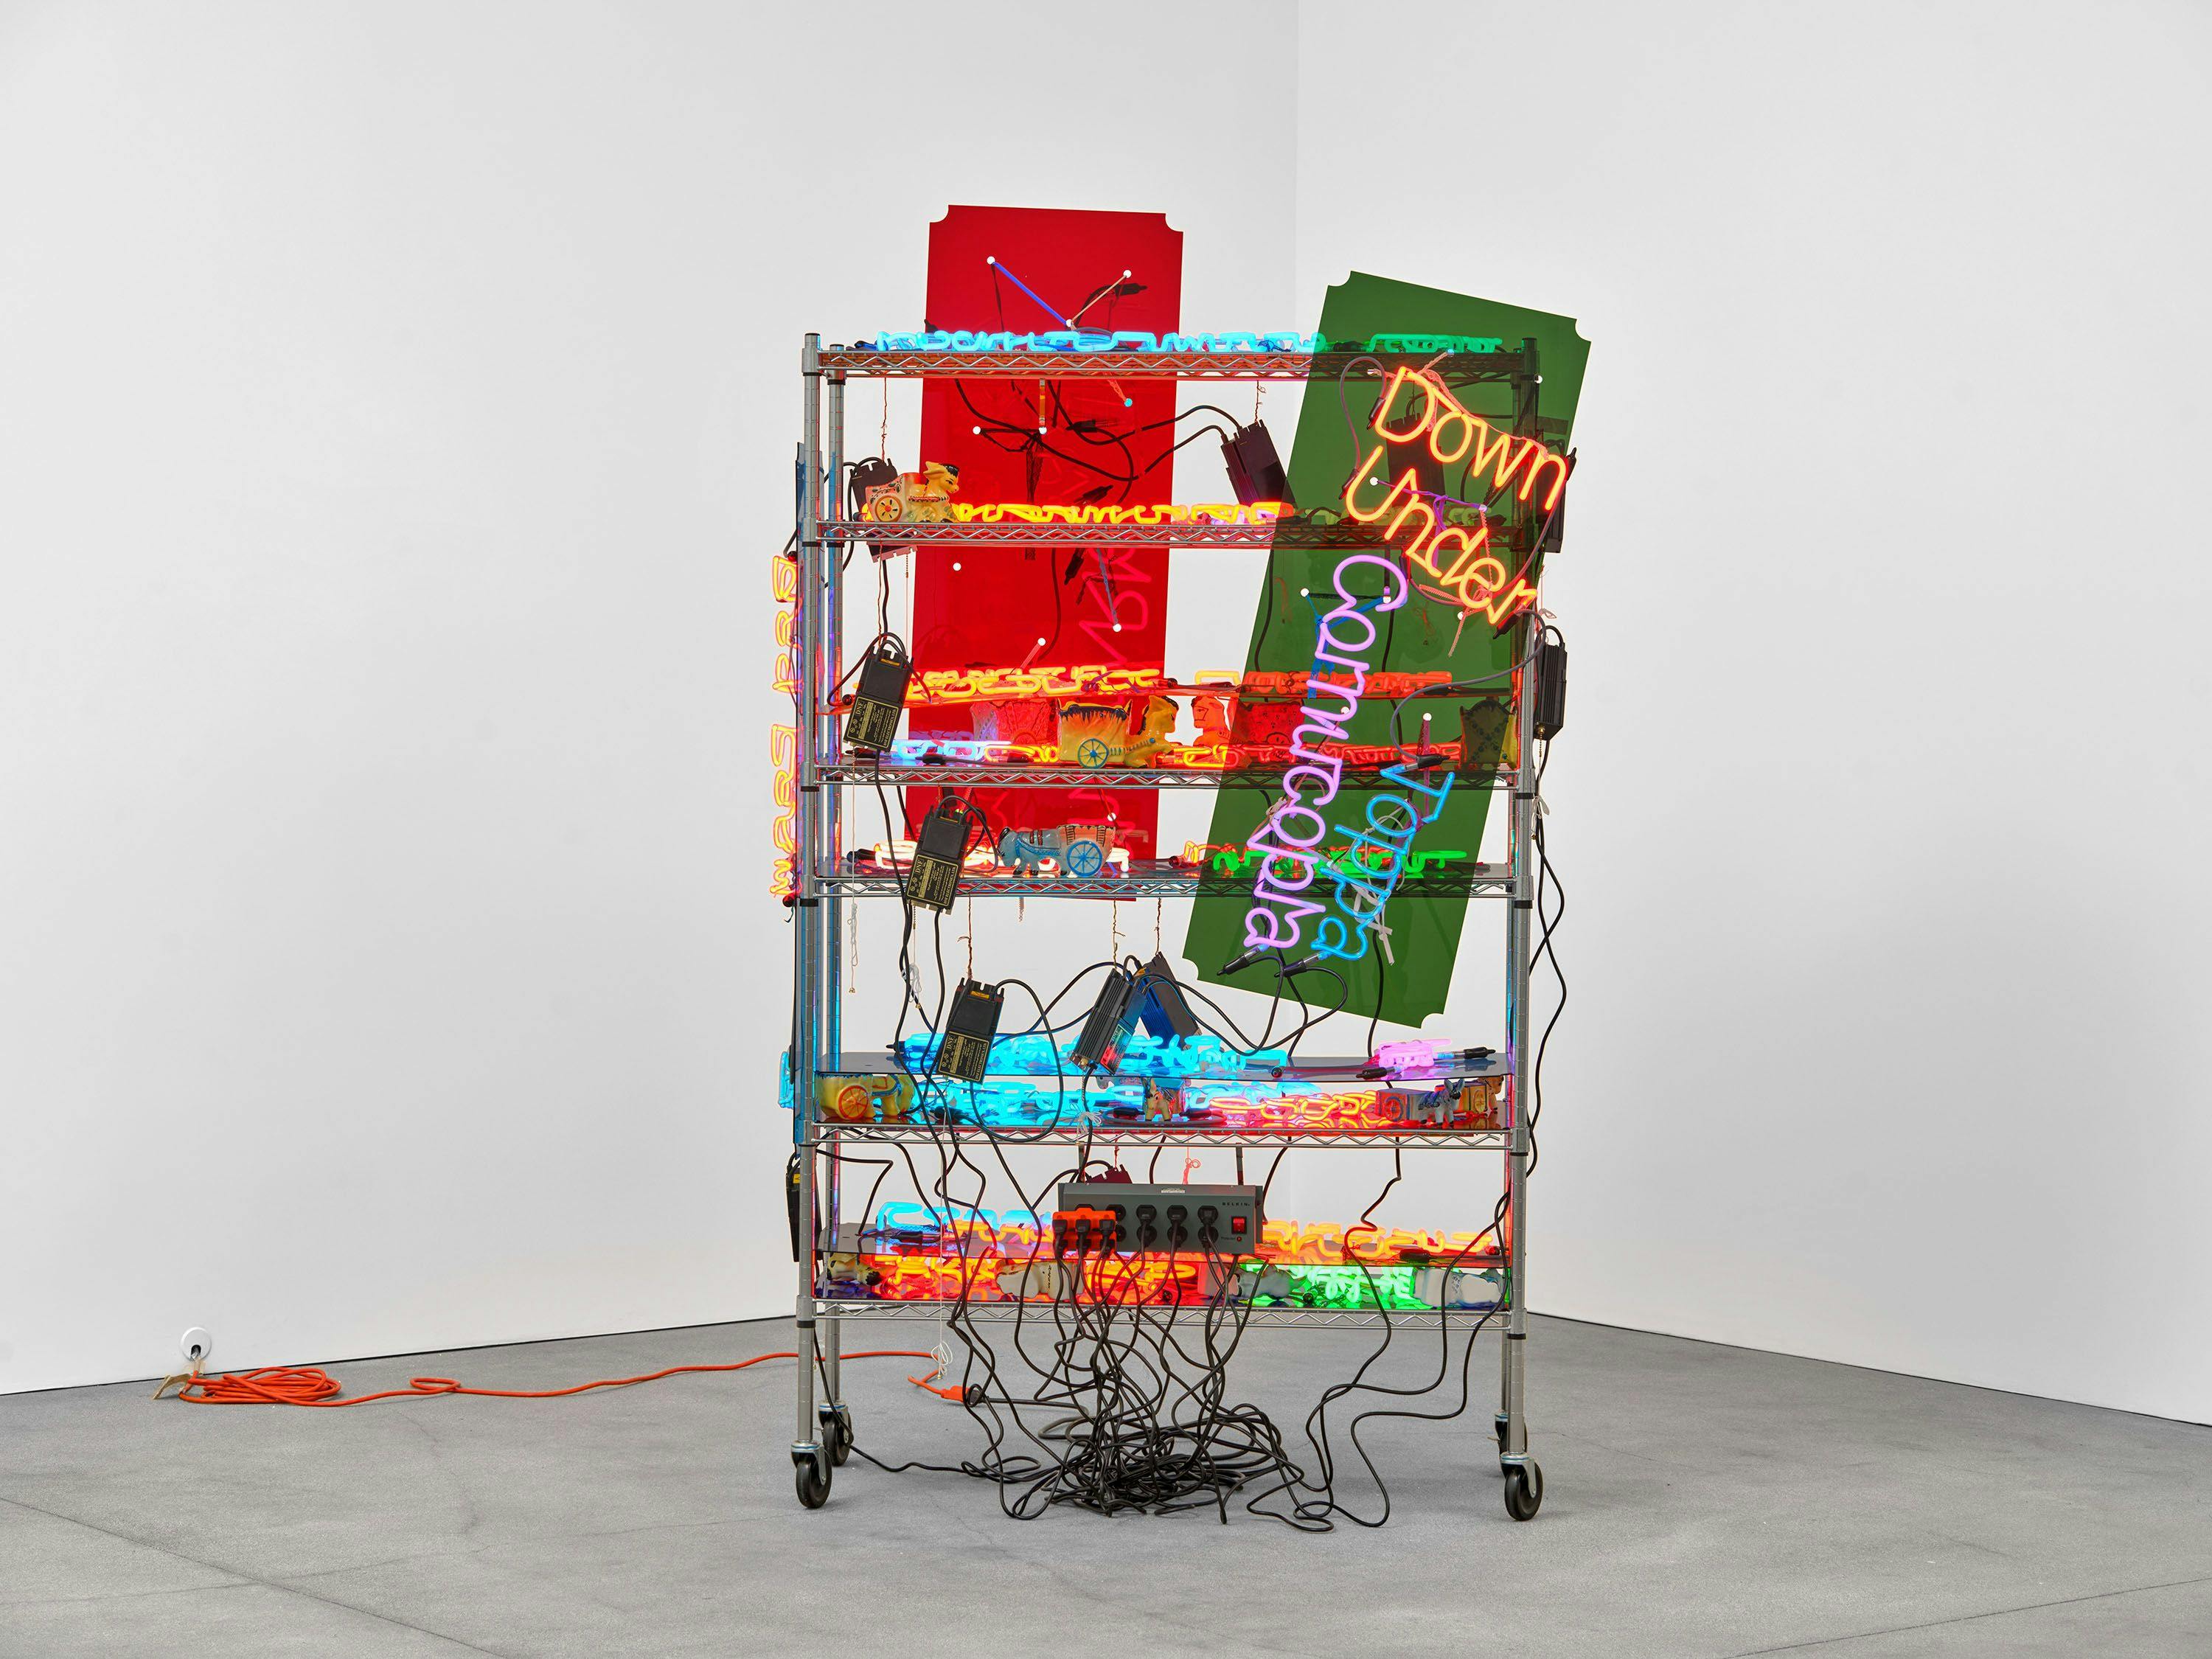 A sculpture by Jason Rhoades, titled Down Under, dated 2003.